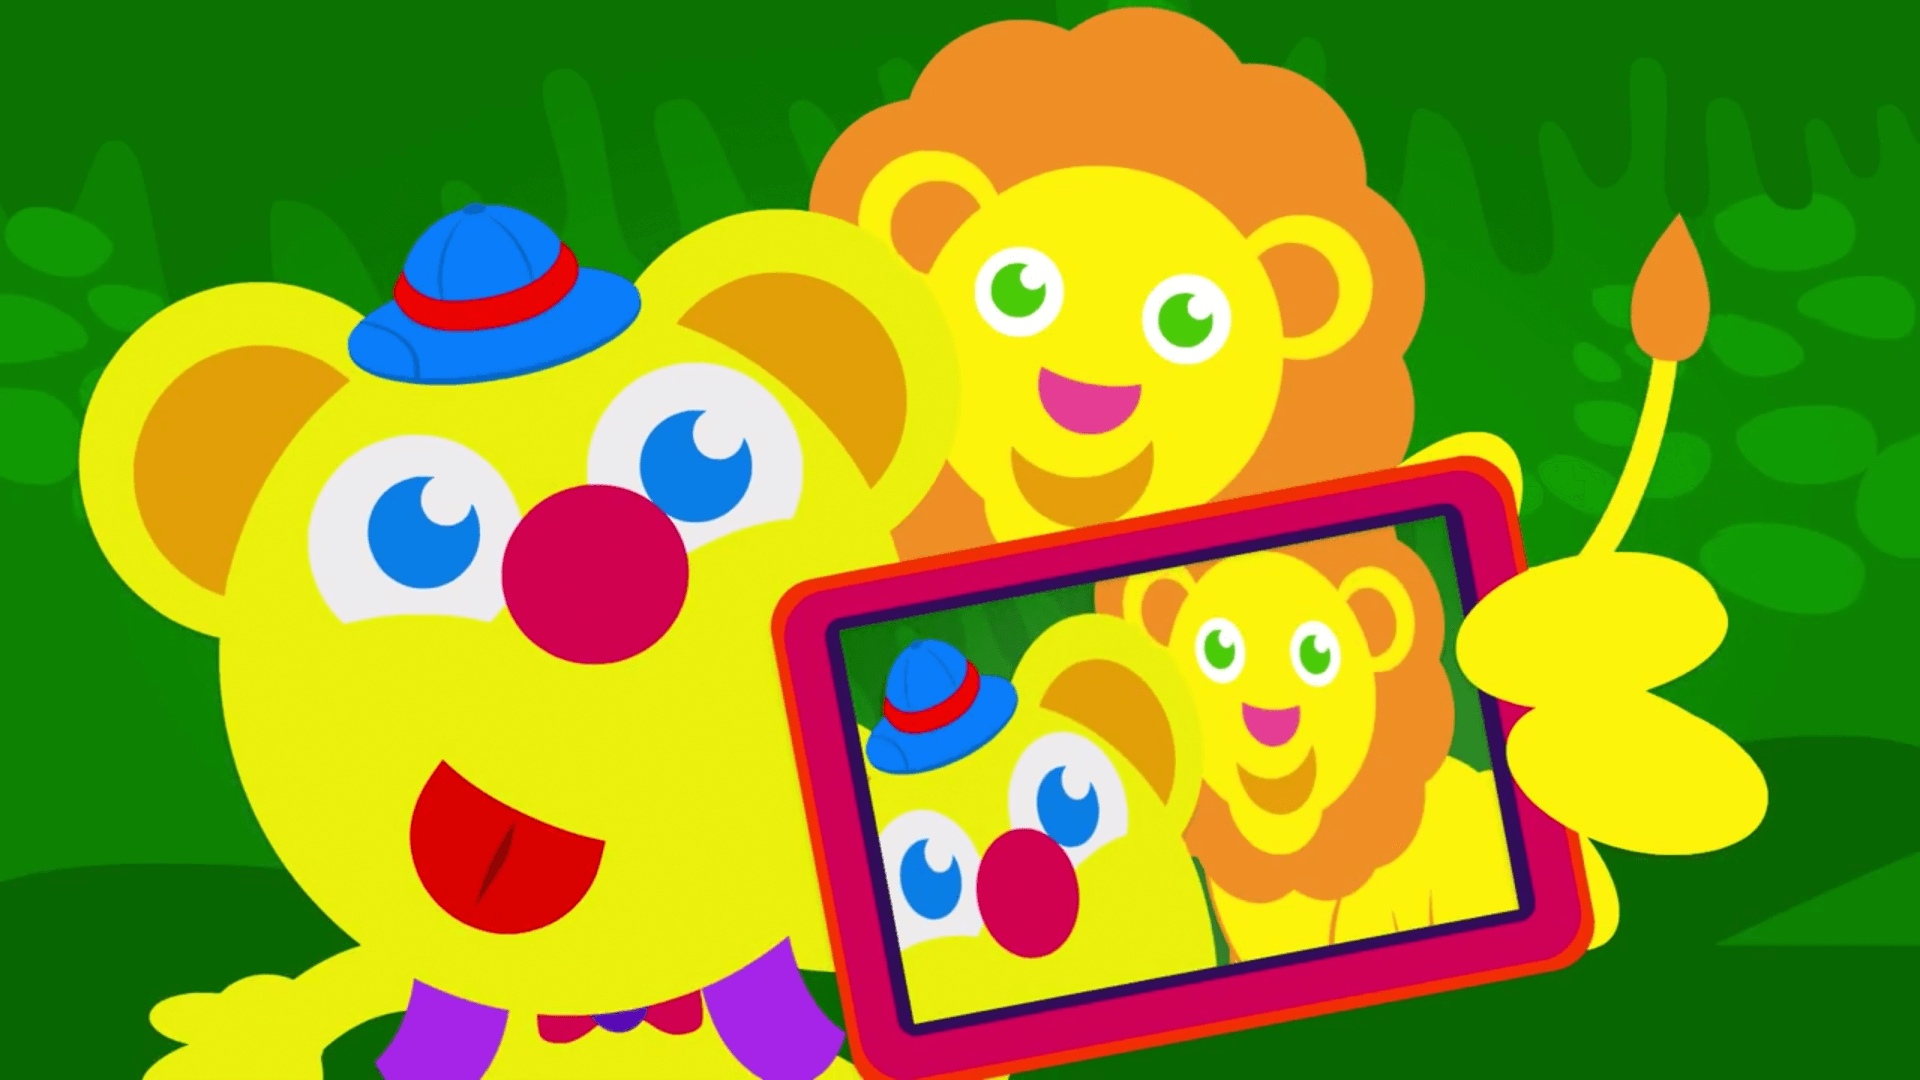 Freddy uses camera to take selfie with lion